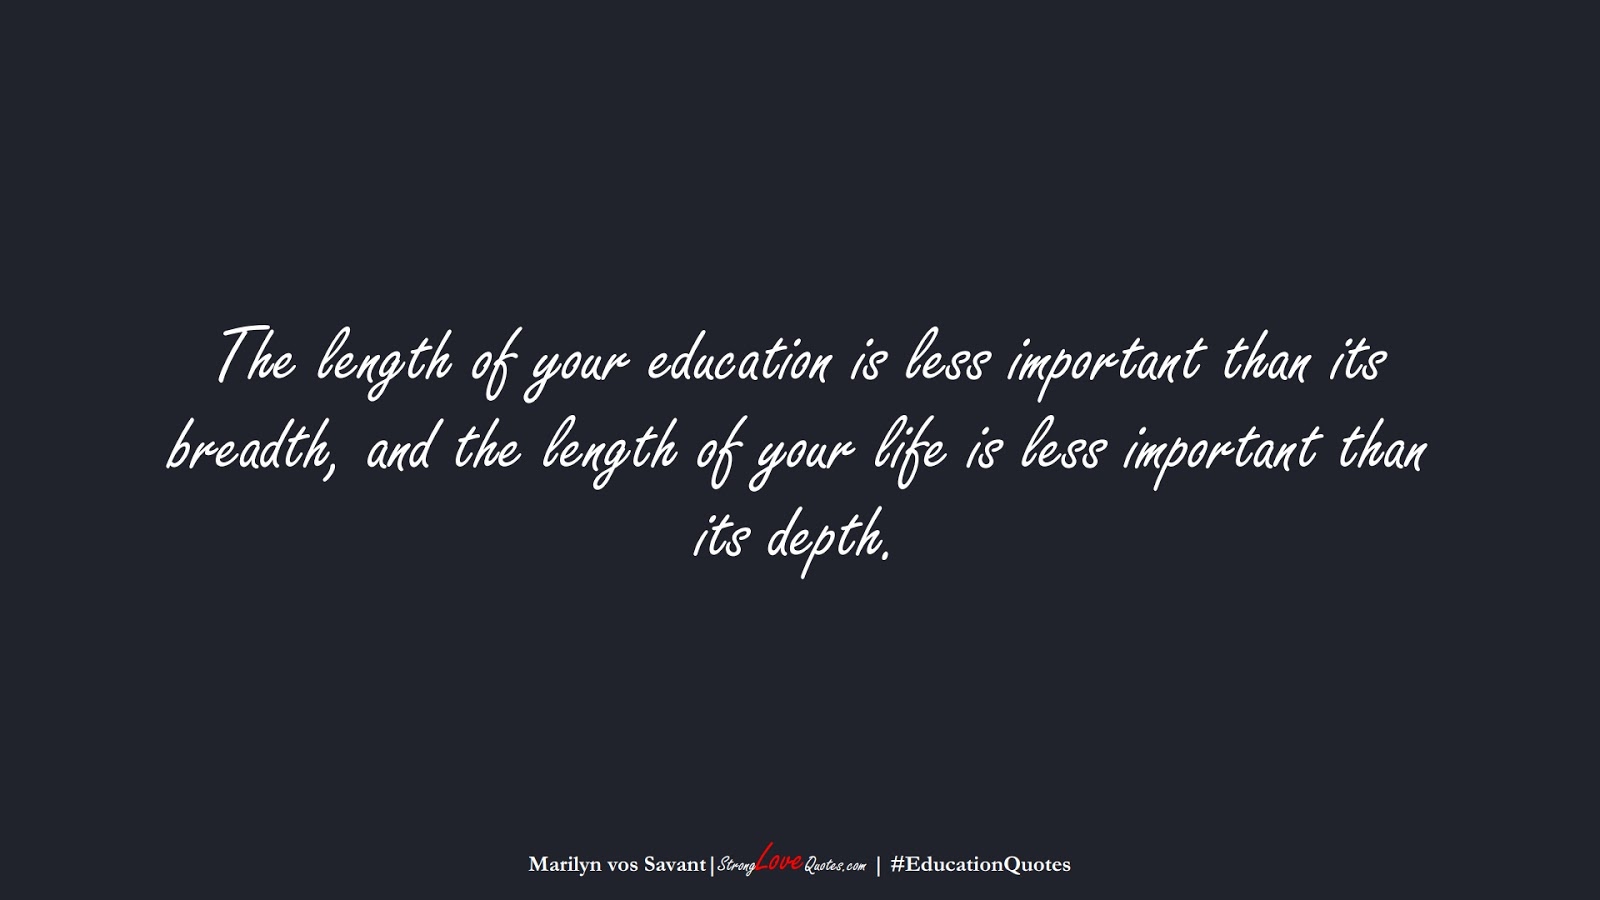 The length of your education is less important than its breadth, and the length of your life is less important than its depth. (Marilyn vos Savant);  #EducationQuotes